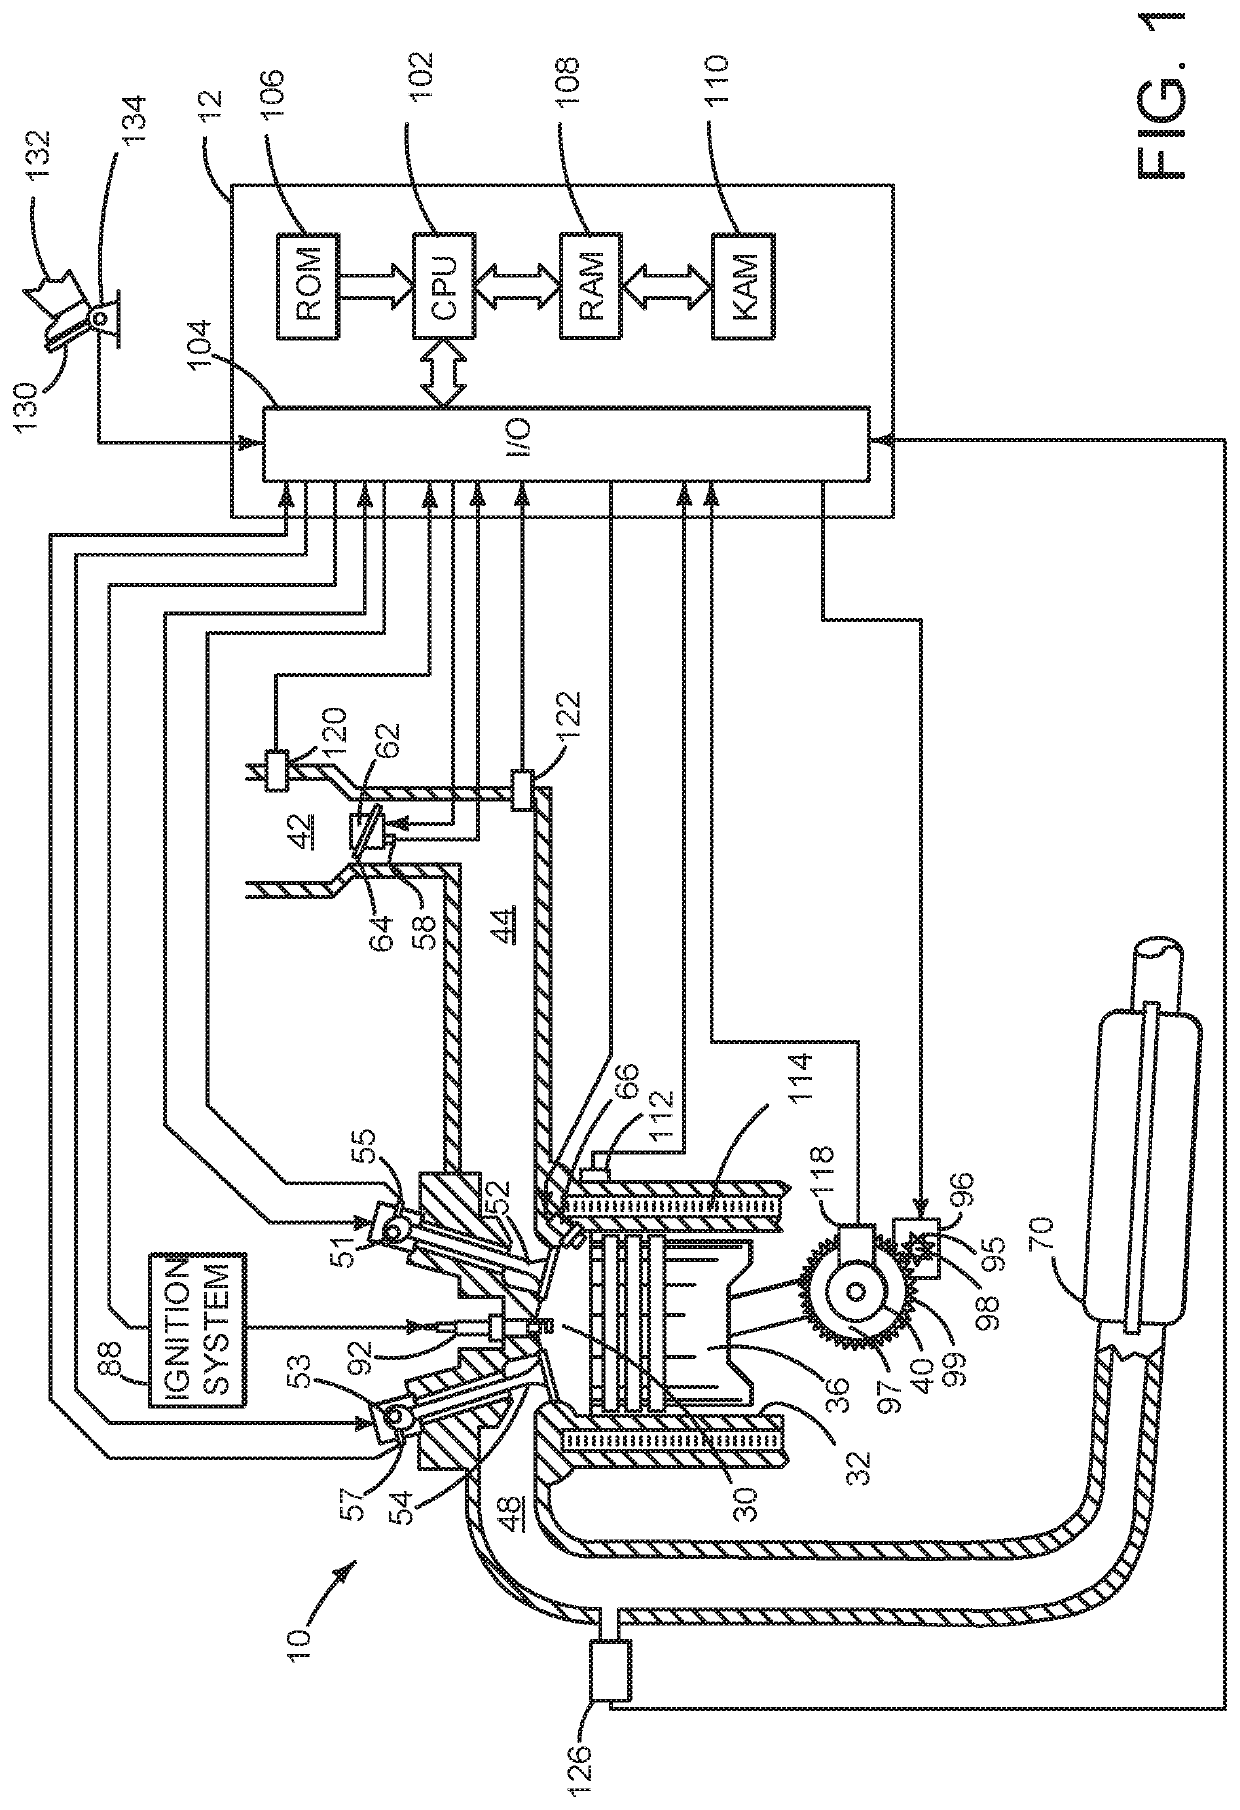 Systems and methods for a hybrid vehicle with a manual shift transmission